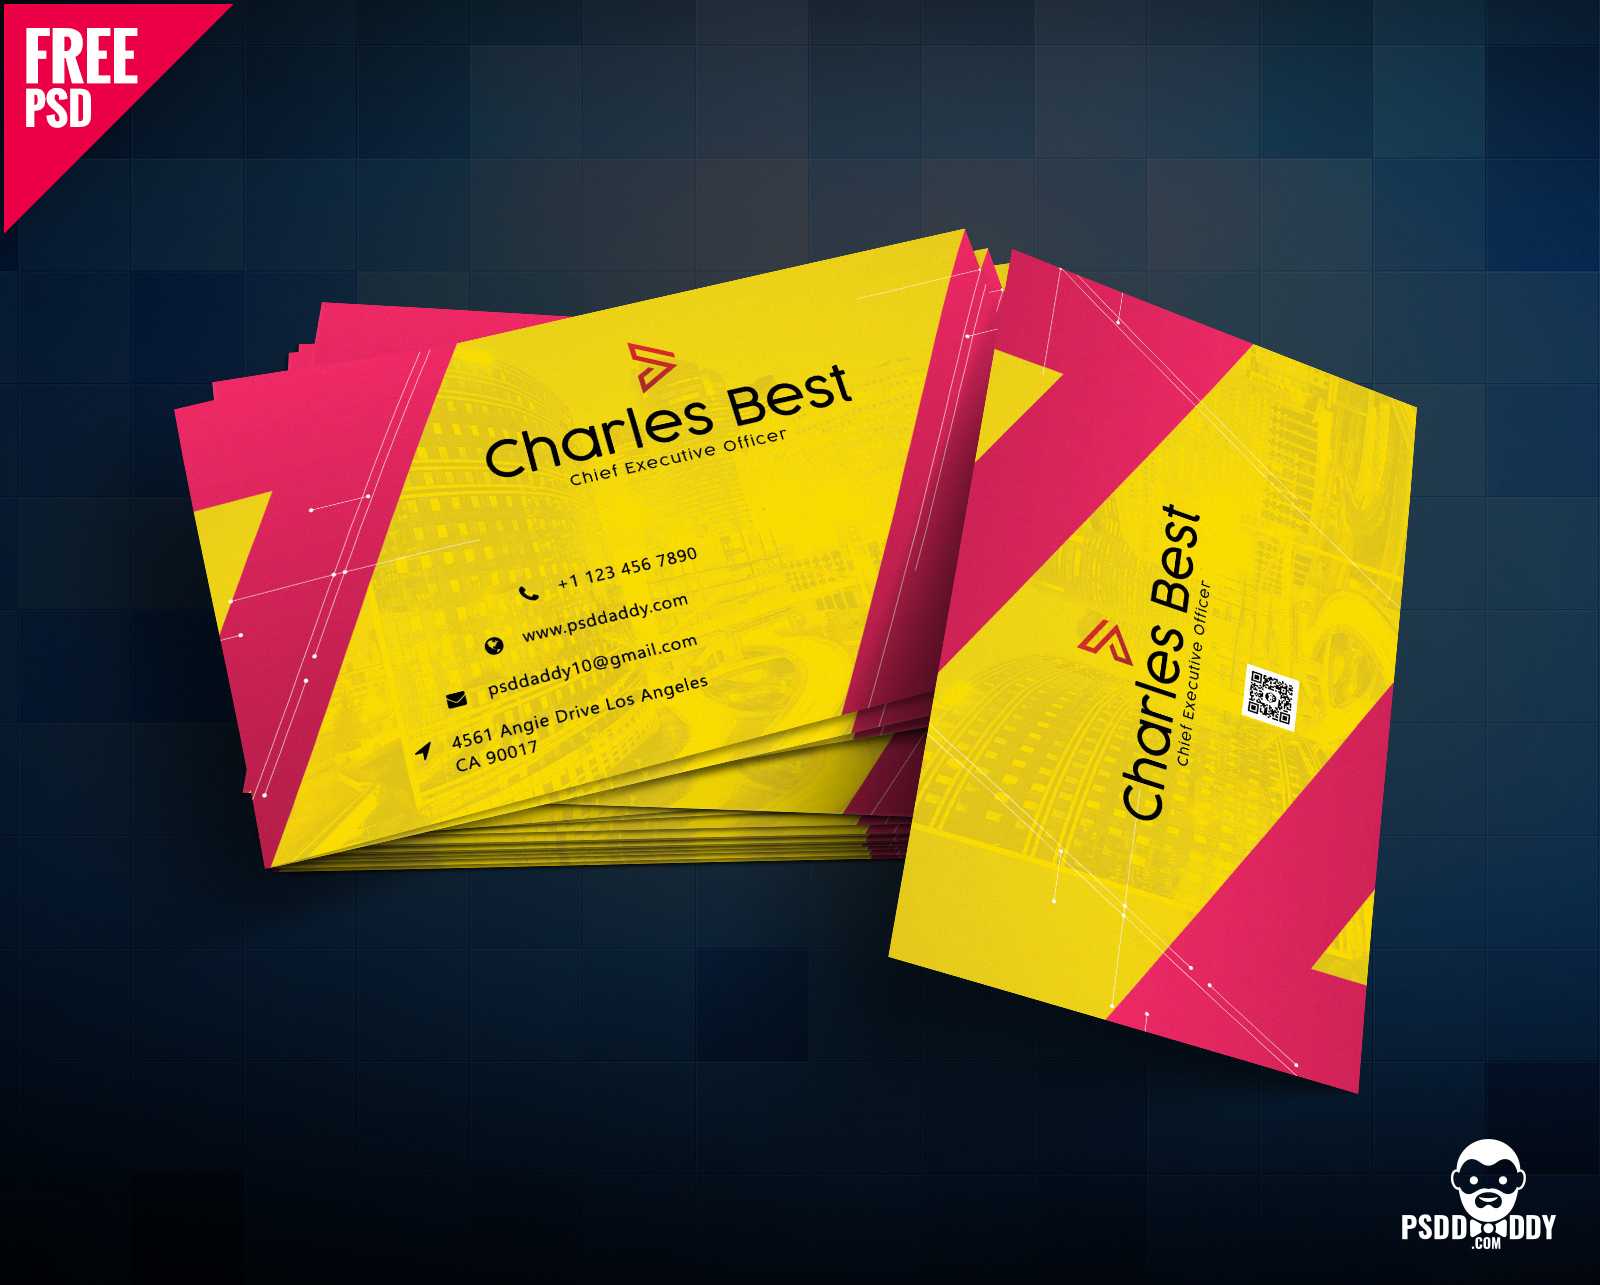 Download] Creative Business Card Free Psd | Psddaddy Throughout Name Card Photoshop Template